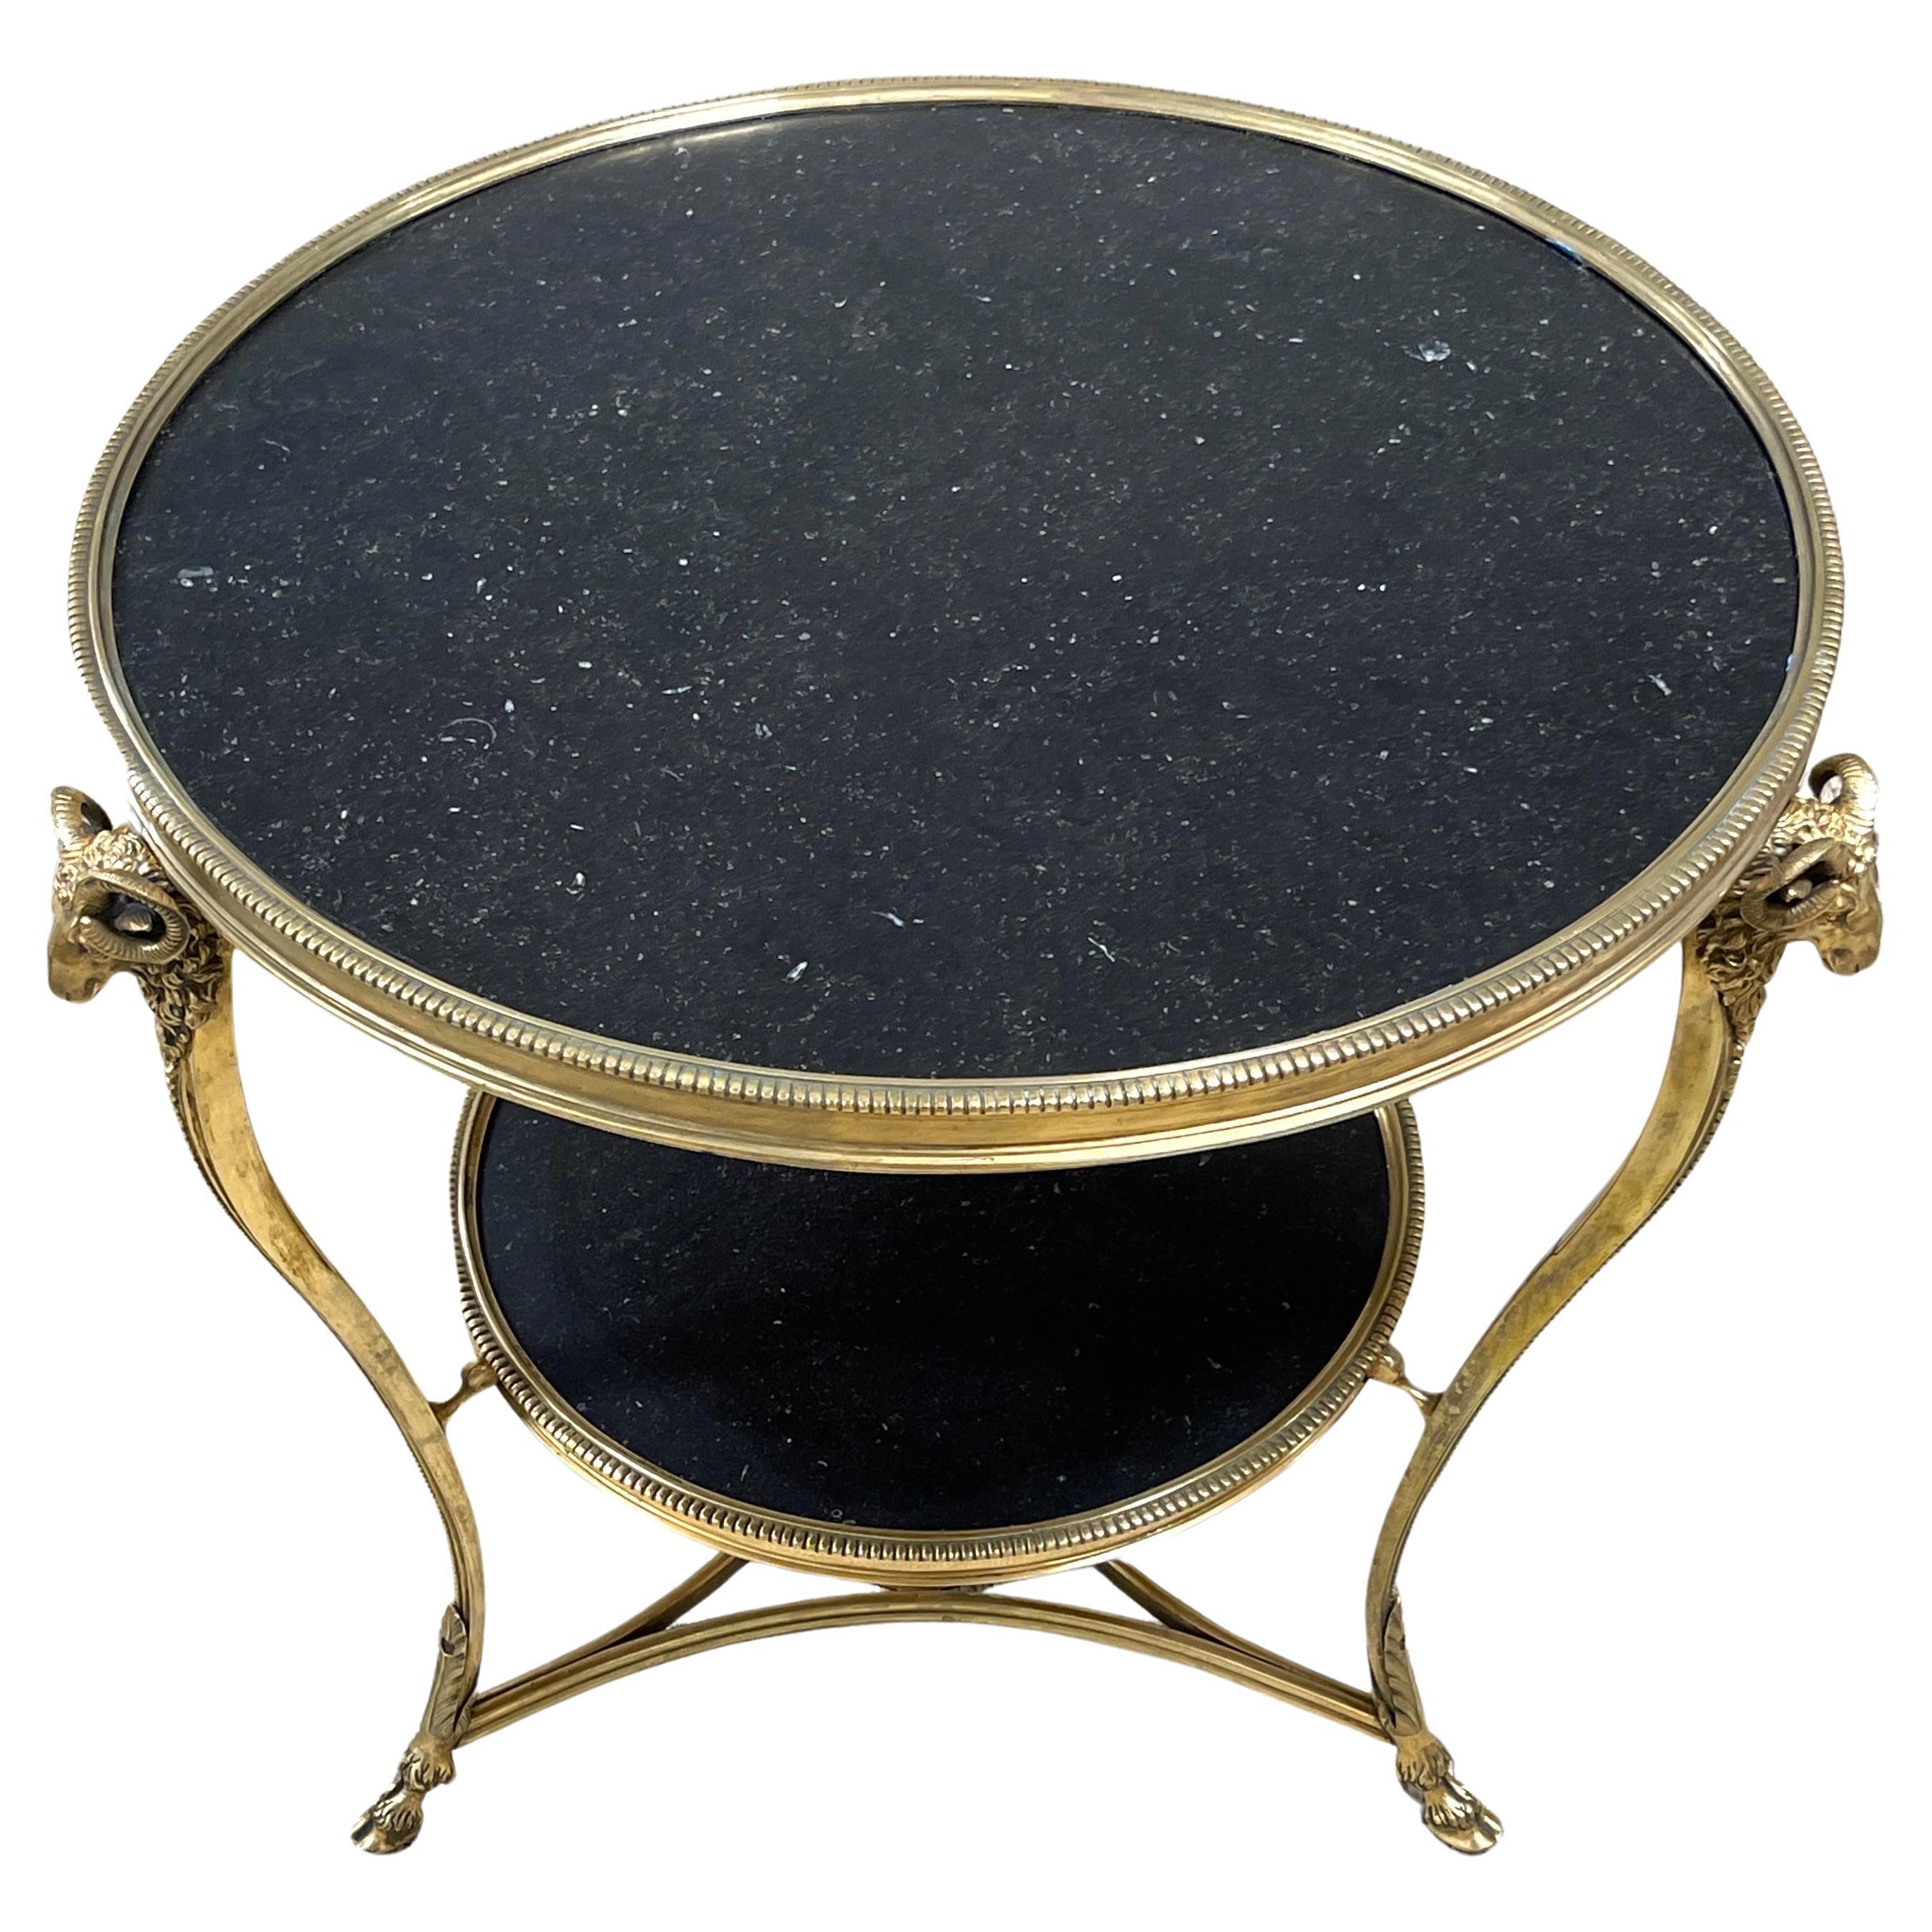 French Neoclassical Gilt Bronze Rams Head & Black Marble Gueridon Table